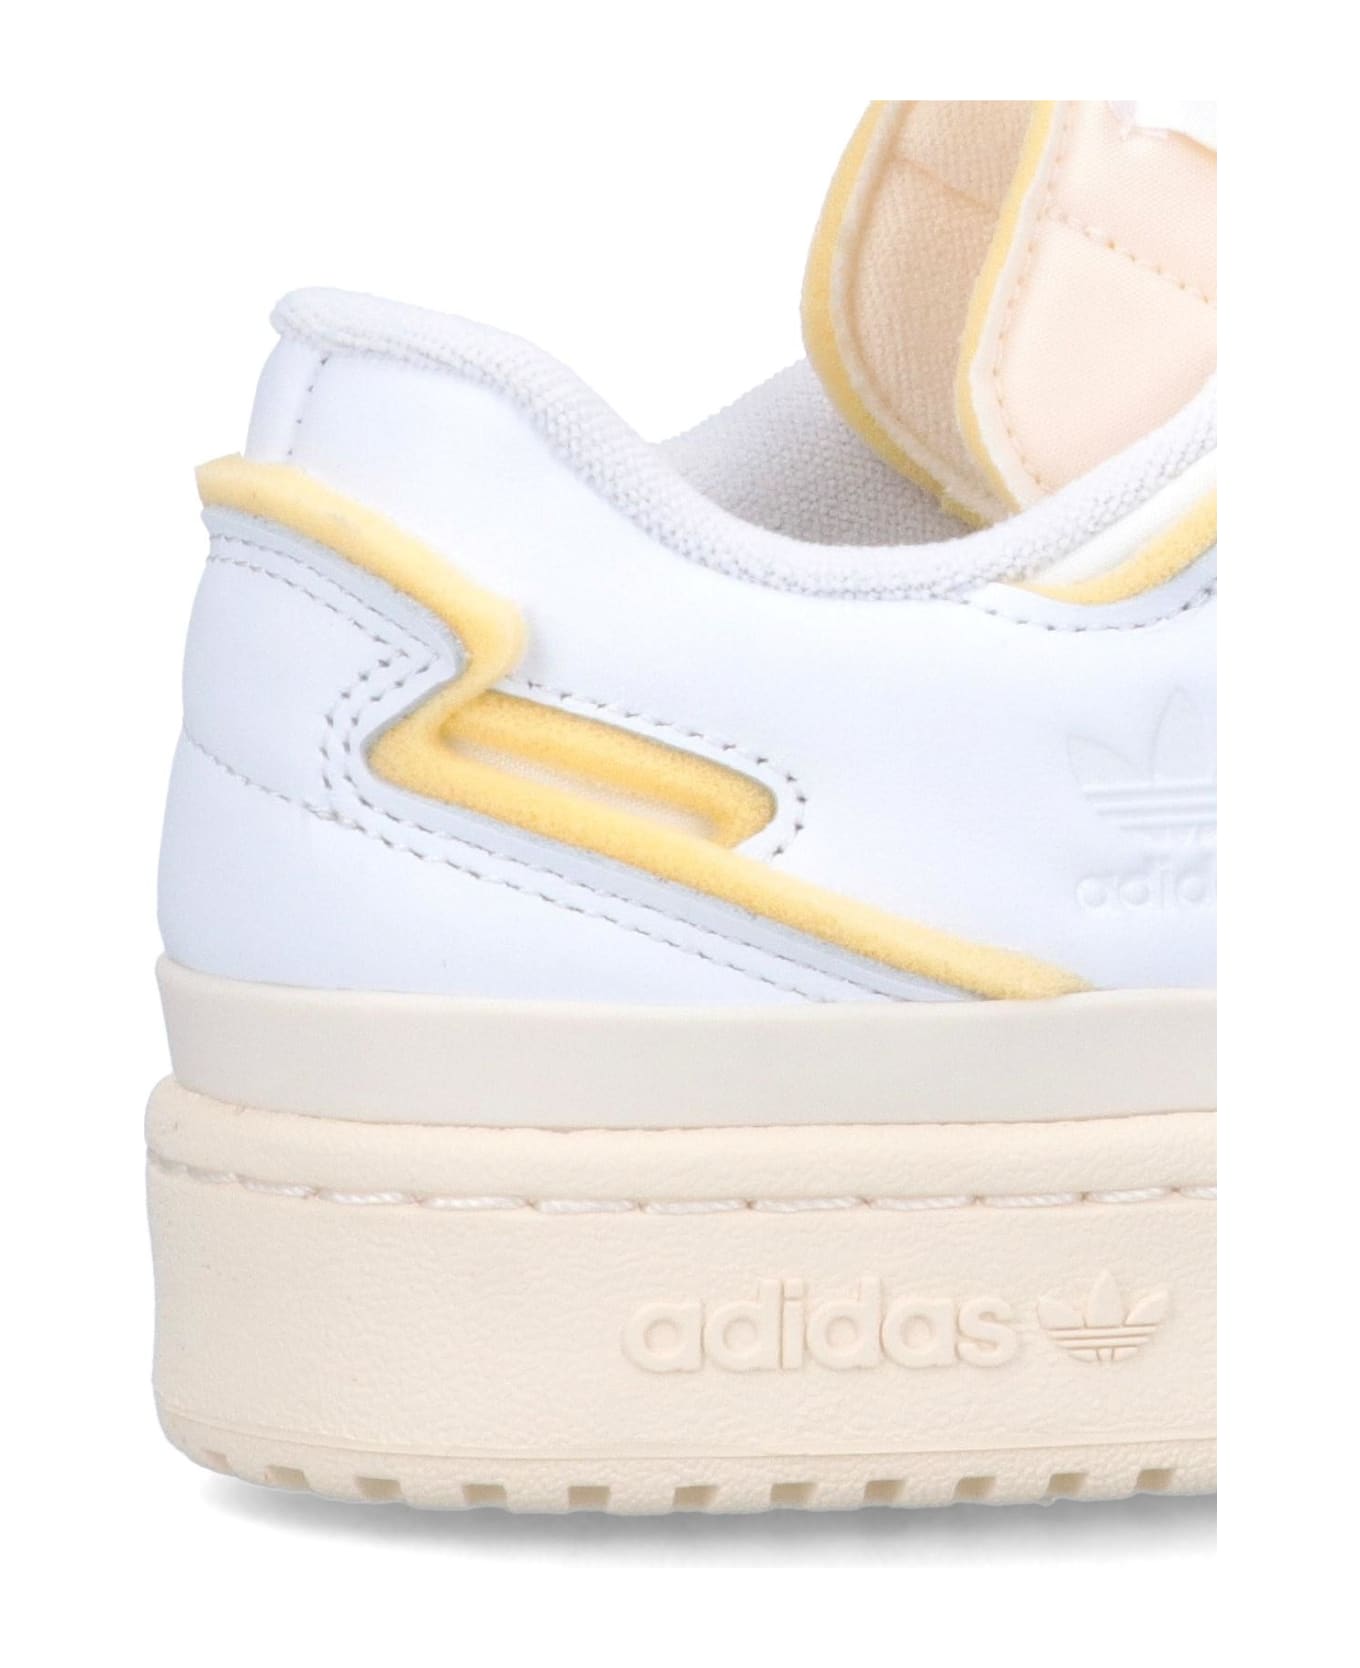 Adidas 'forum 84 Low' Sneakers - Ftwwht/ftwwht/owhite スニーカー